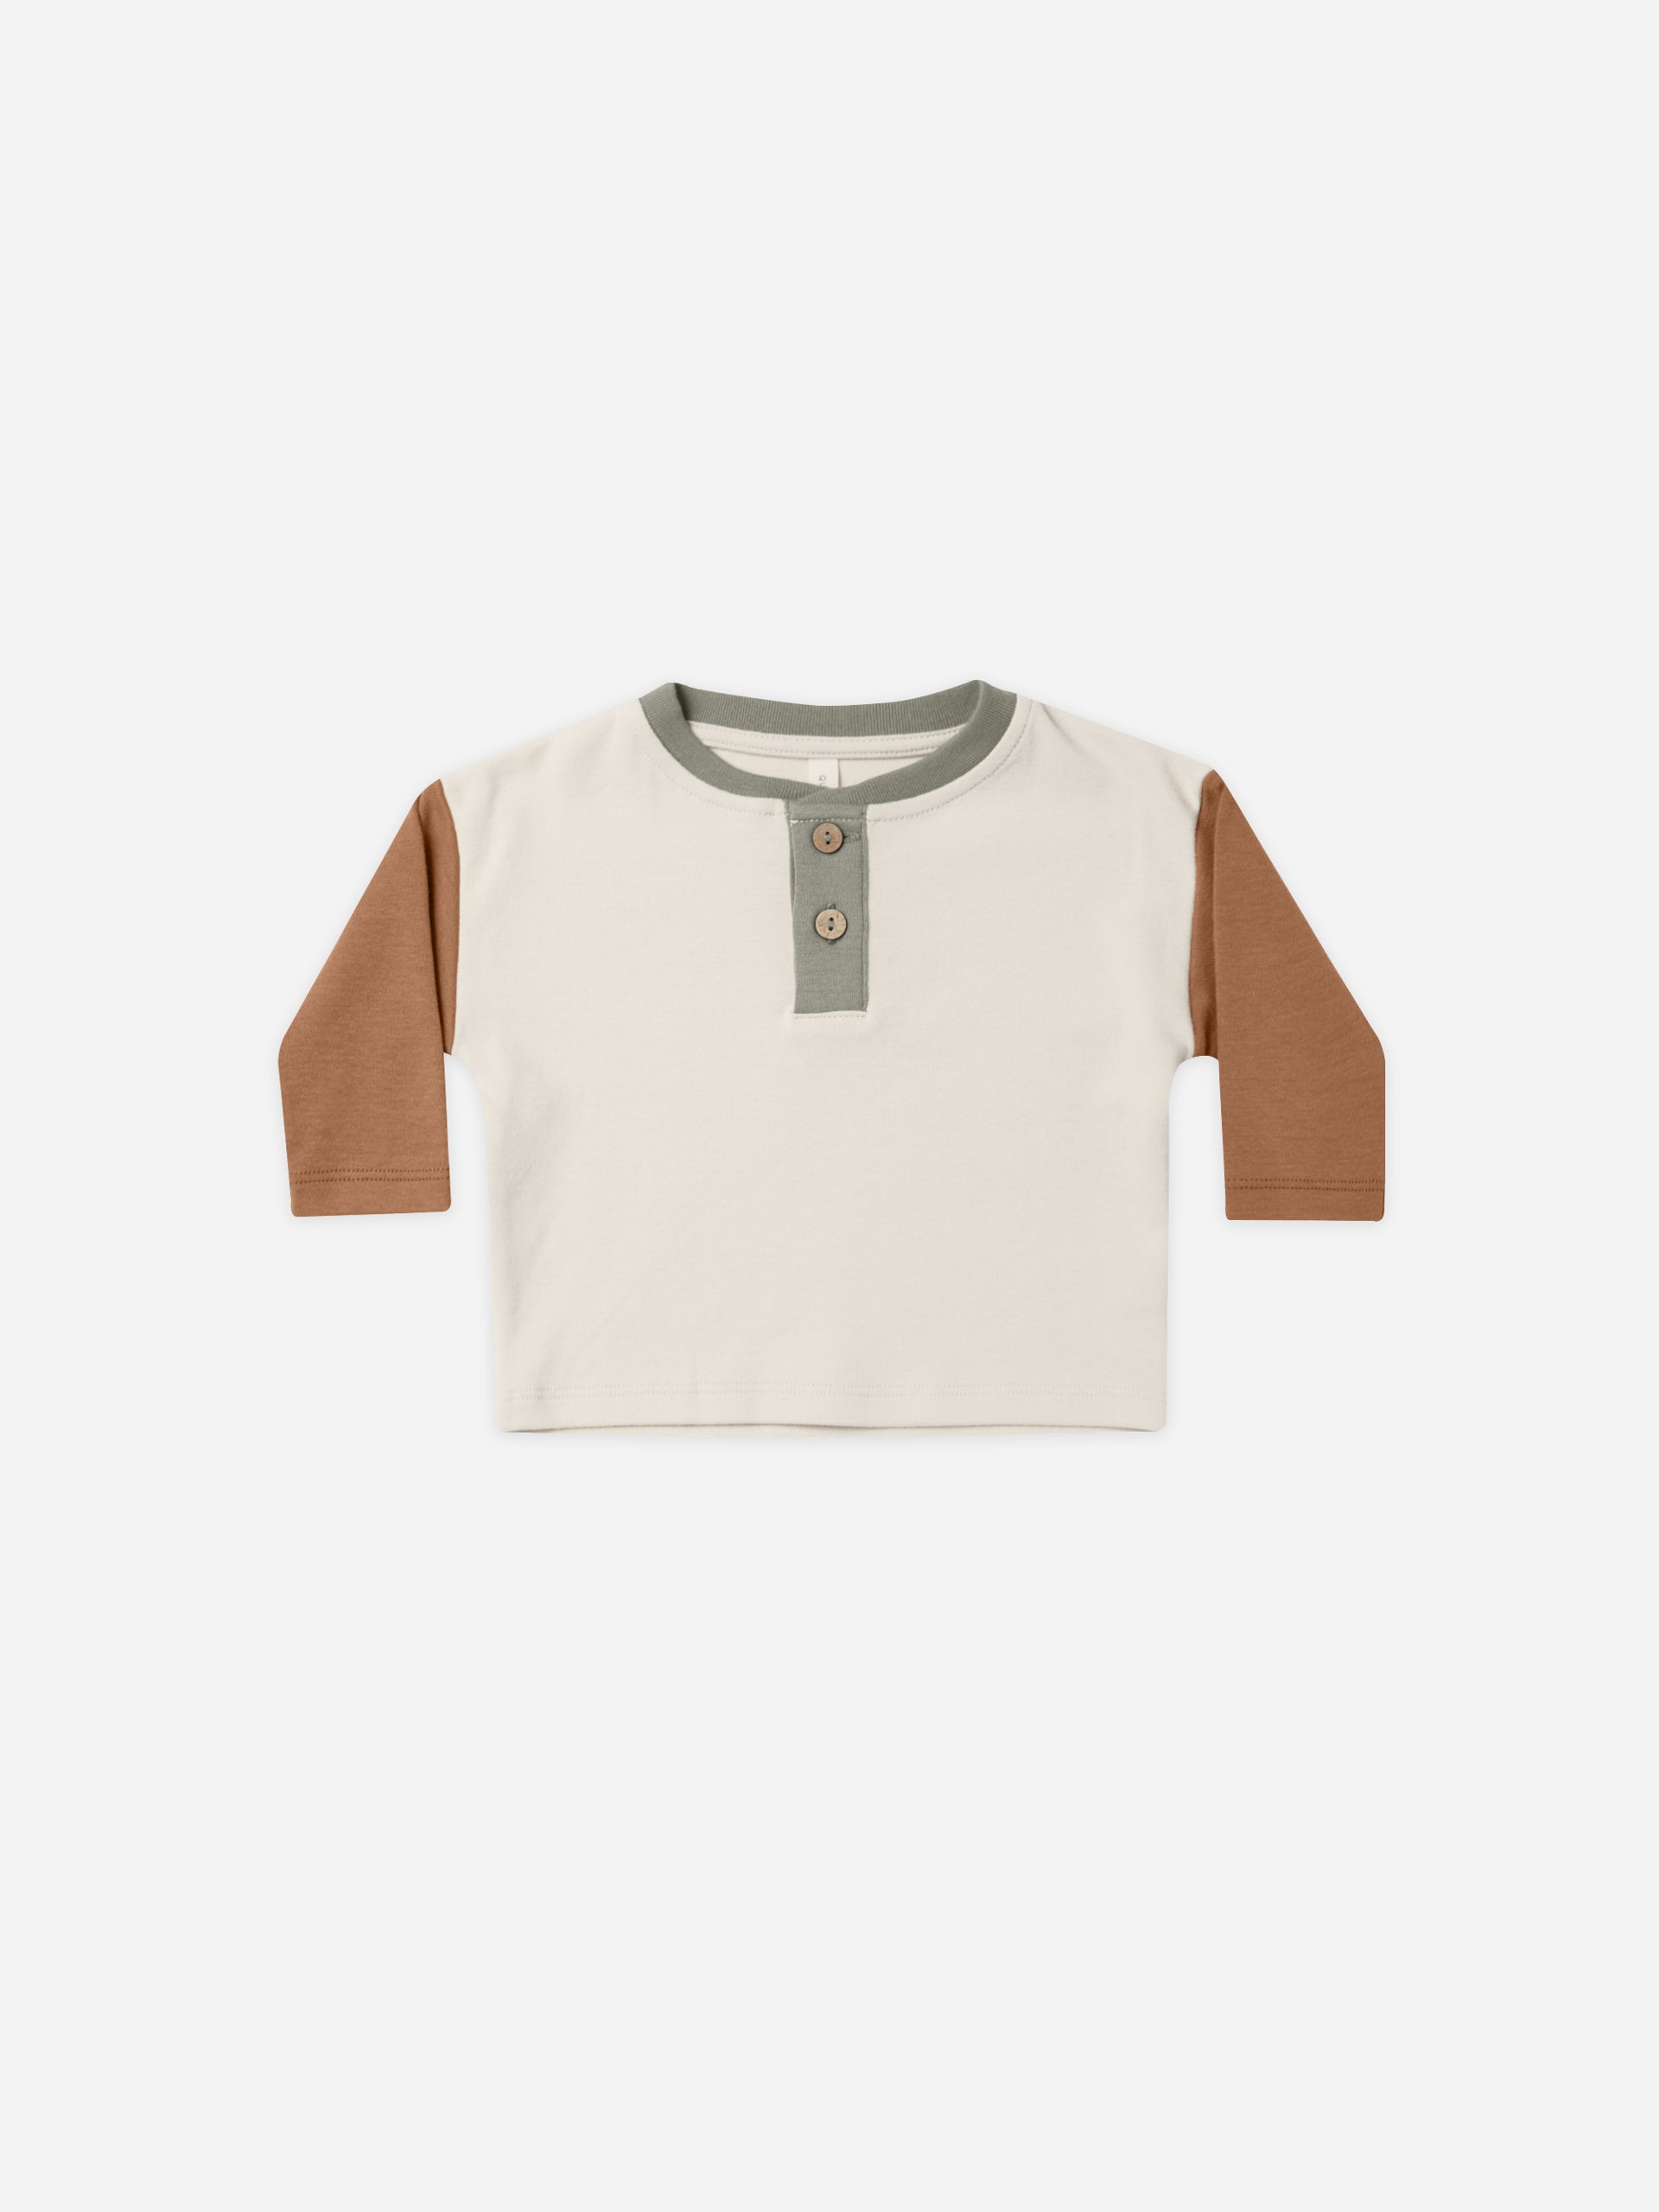 Long Sleeve Henley Tee || Color Block - Rylee + Cru | Kids Clothes | Trendy Baby Clothes | Modern Infant Outfits |